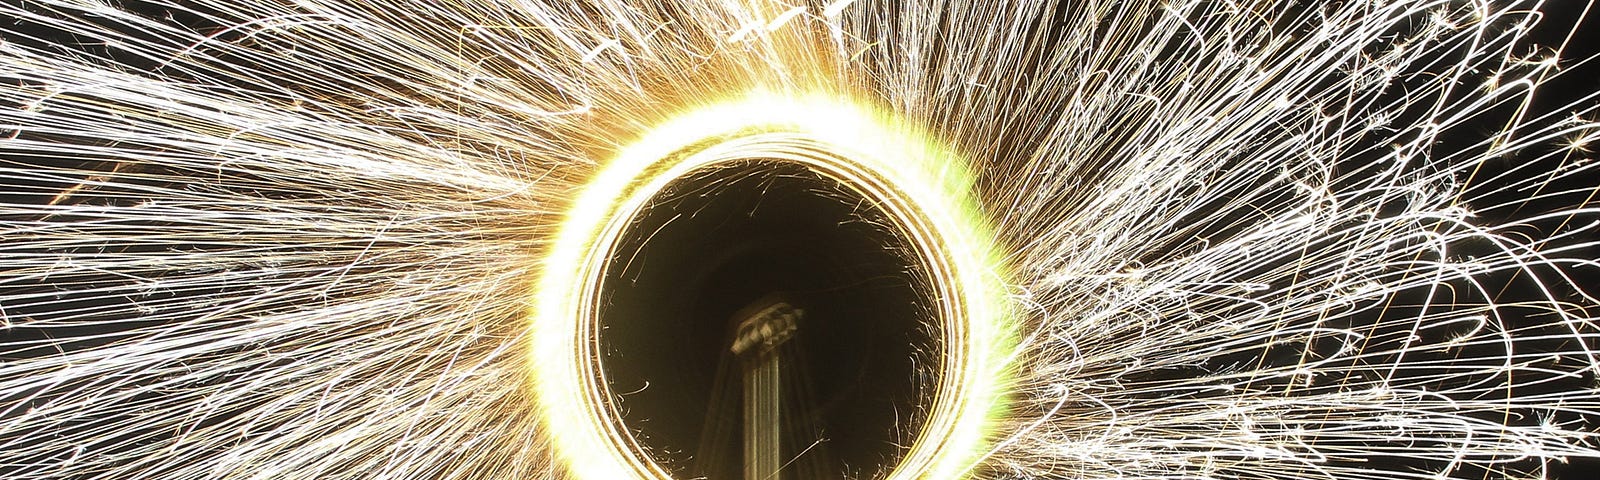 Image of a Catherine wheel firework alight spinning and sparks flying in Holland